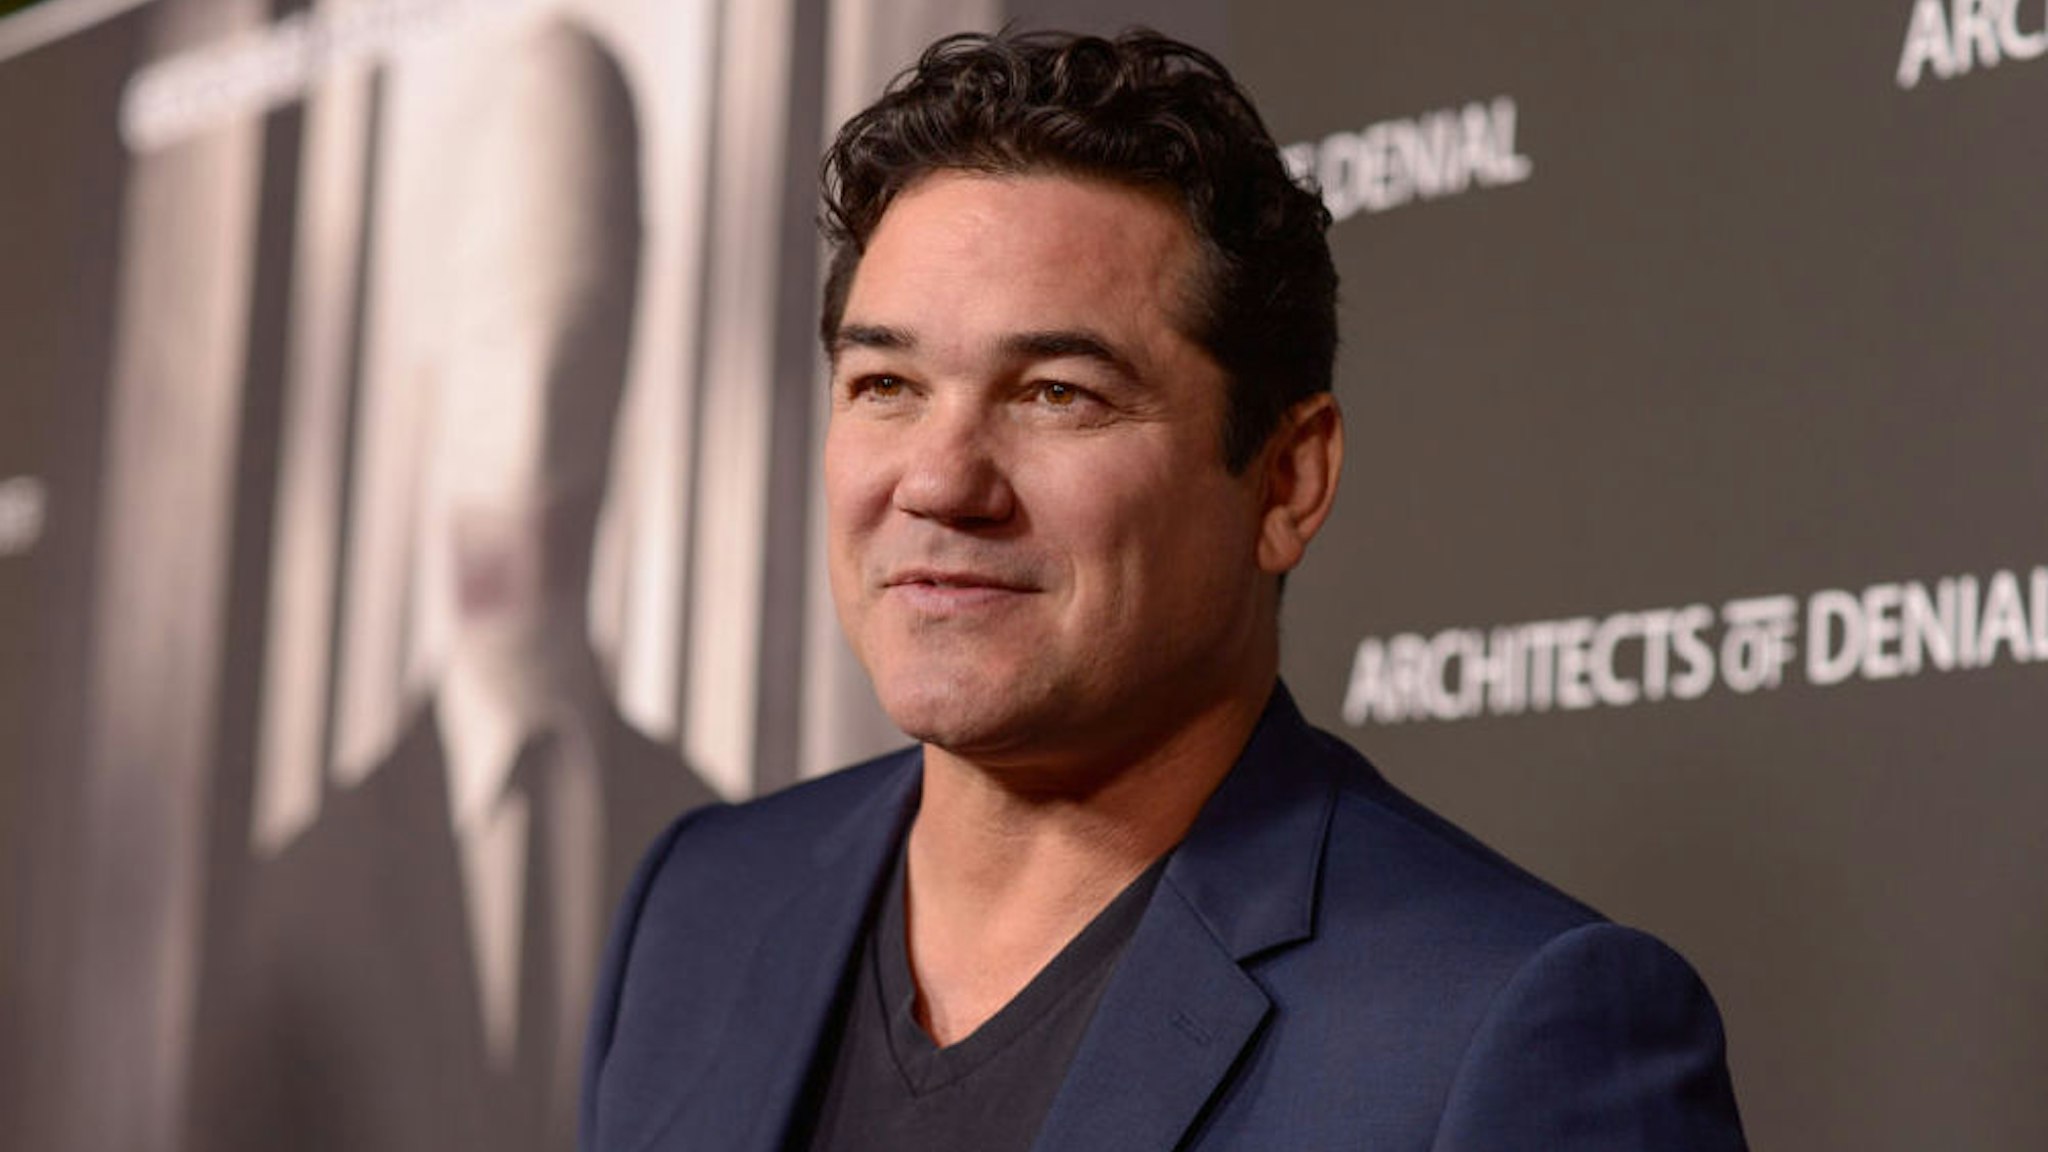 Executive producer Dean Cain attends the premiere of 'Architects Of Denial' at Taglyan Complex on October 3, 2017 in Los Angeles, California. (Photo by Tara Ziemba/Getty Images)